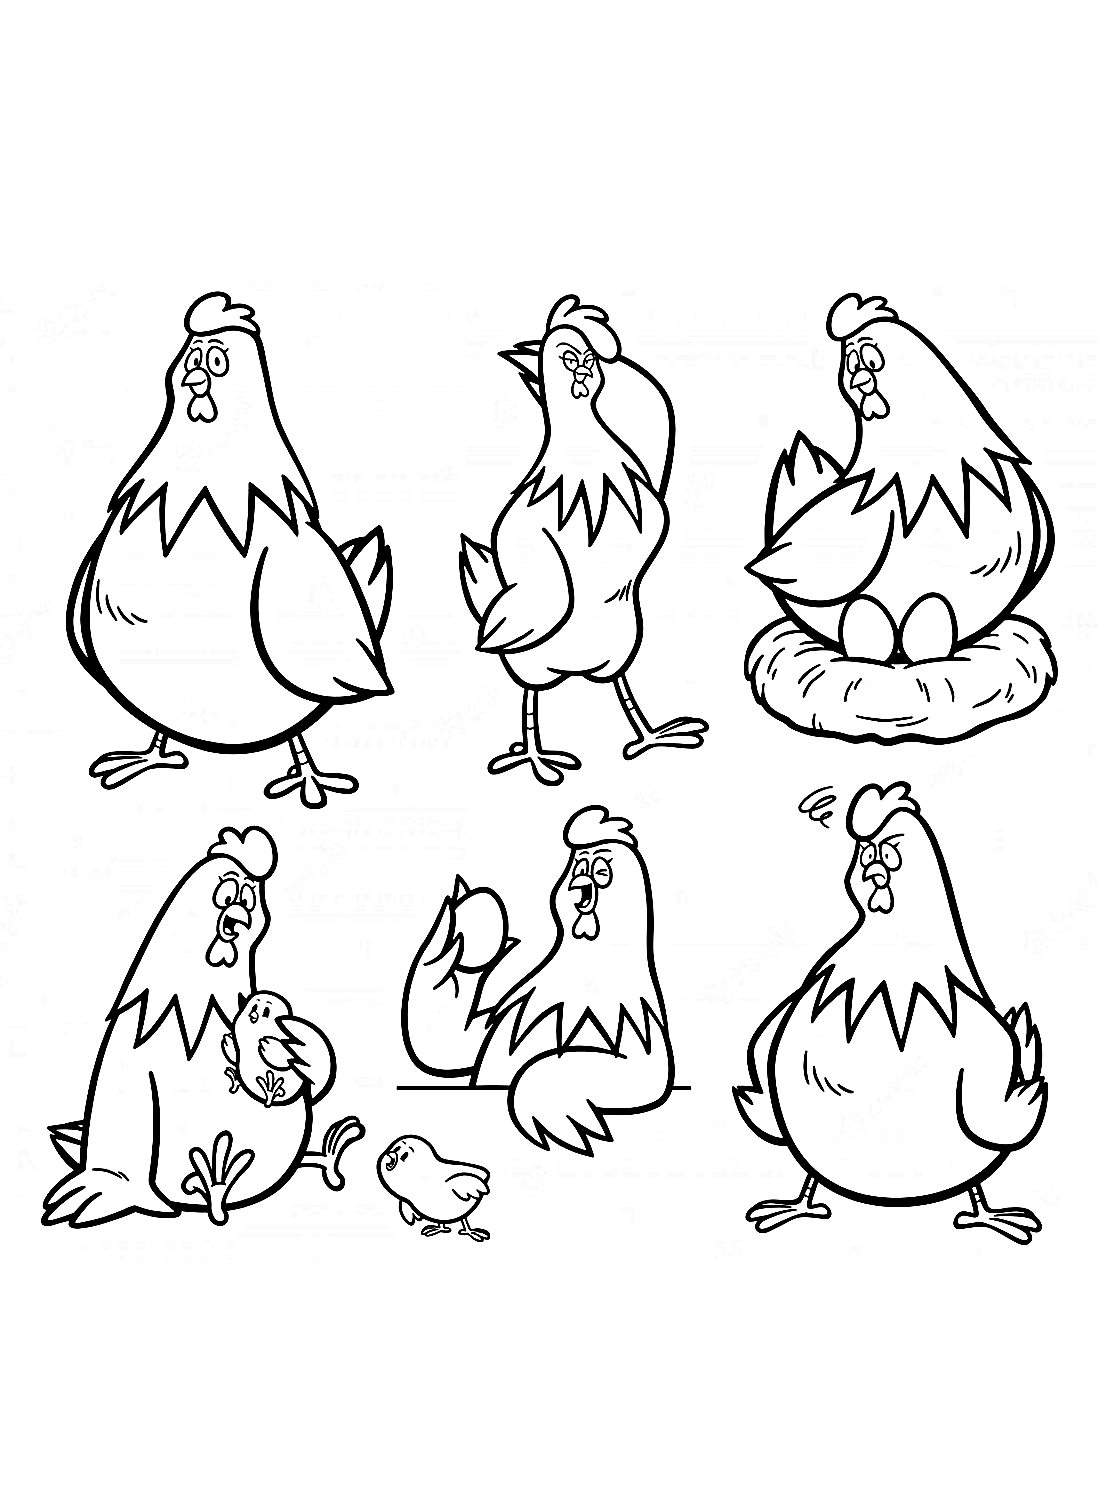 Emotion of Hen Coloring Page